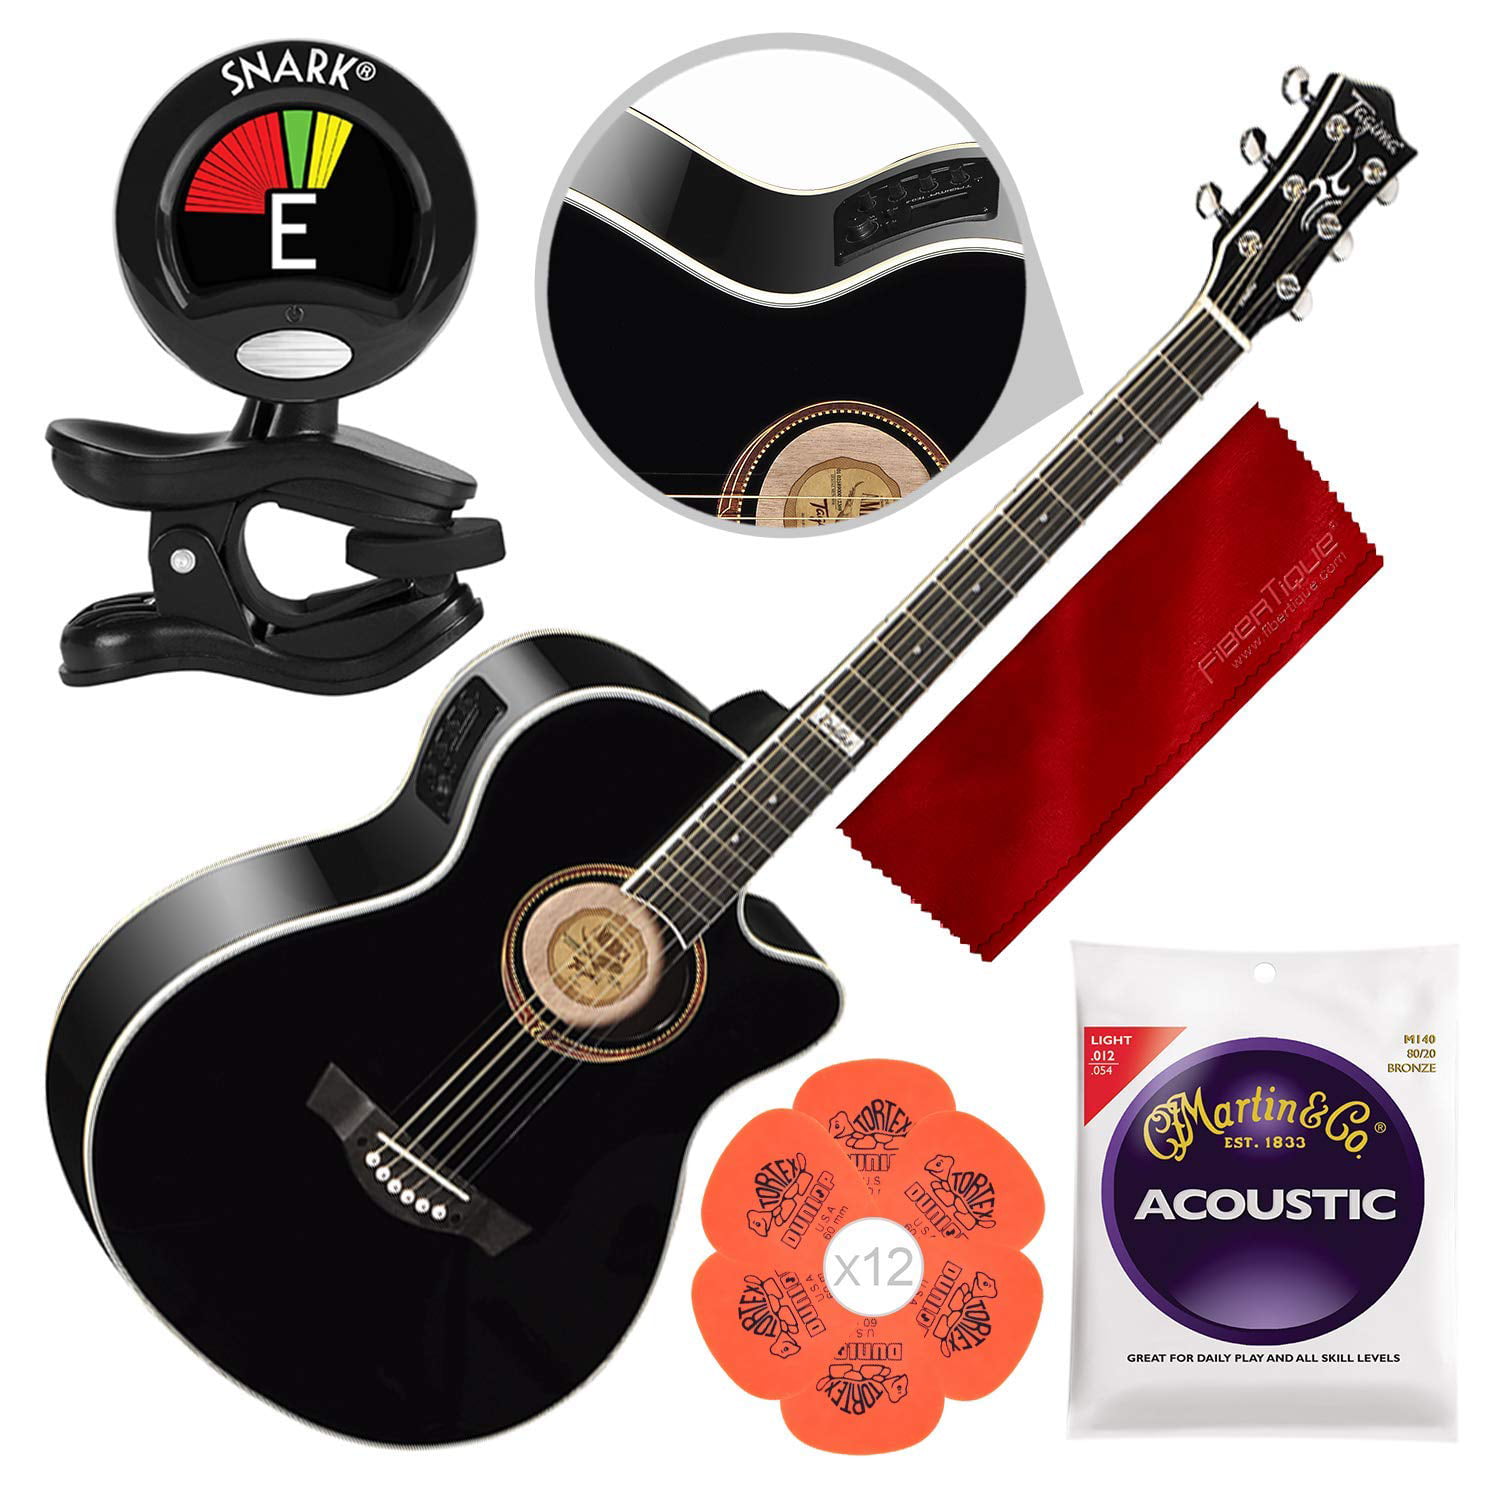 Tagima America Series Dallas-T NS Acoustic Electric Guitar, Black with  Clip-On Tuner & Accessory Bundle